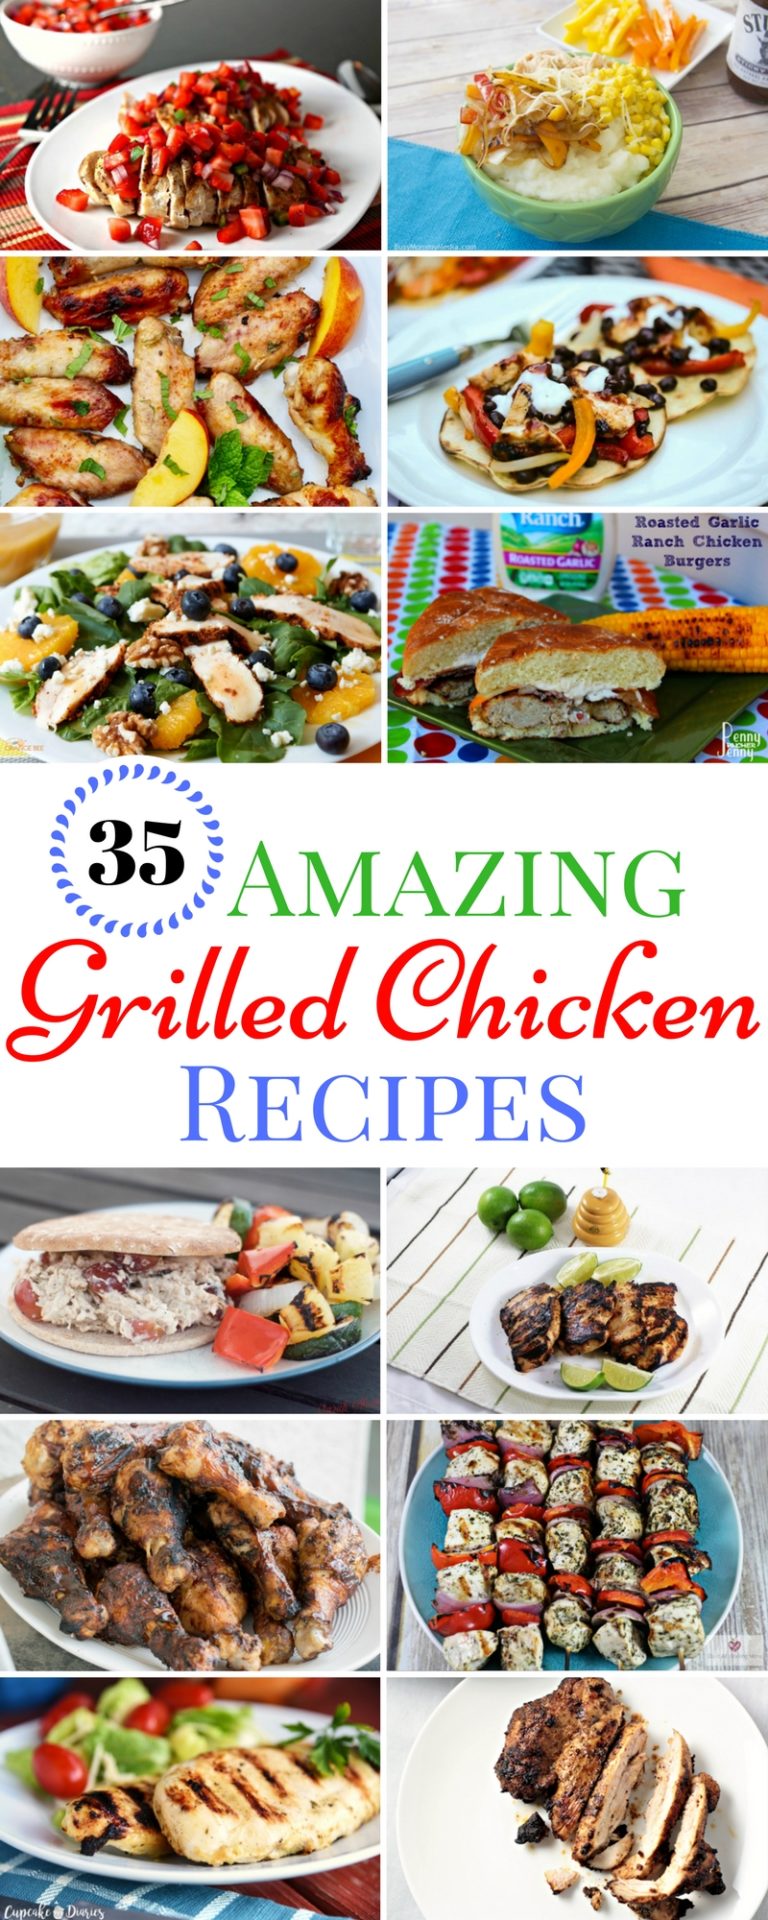 35 Amazing Grilled Chicken Recipes - Mindy's Cooking Obsession